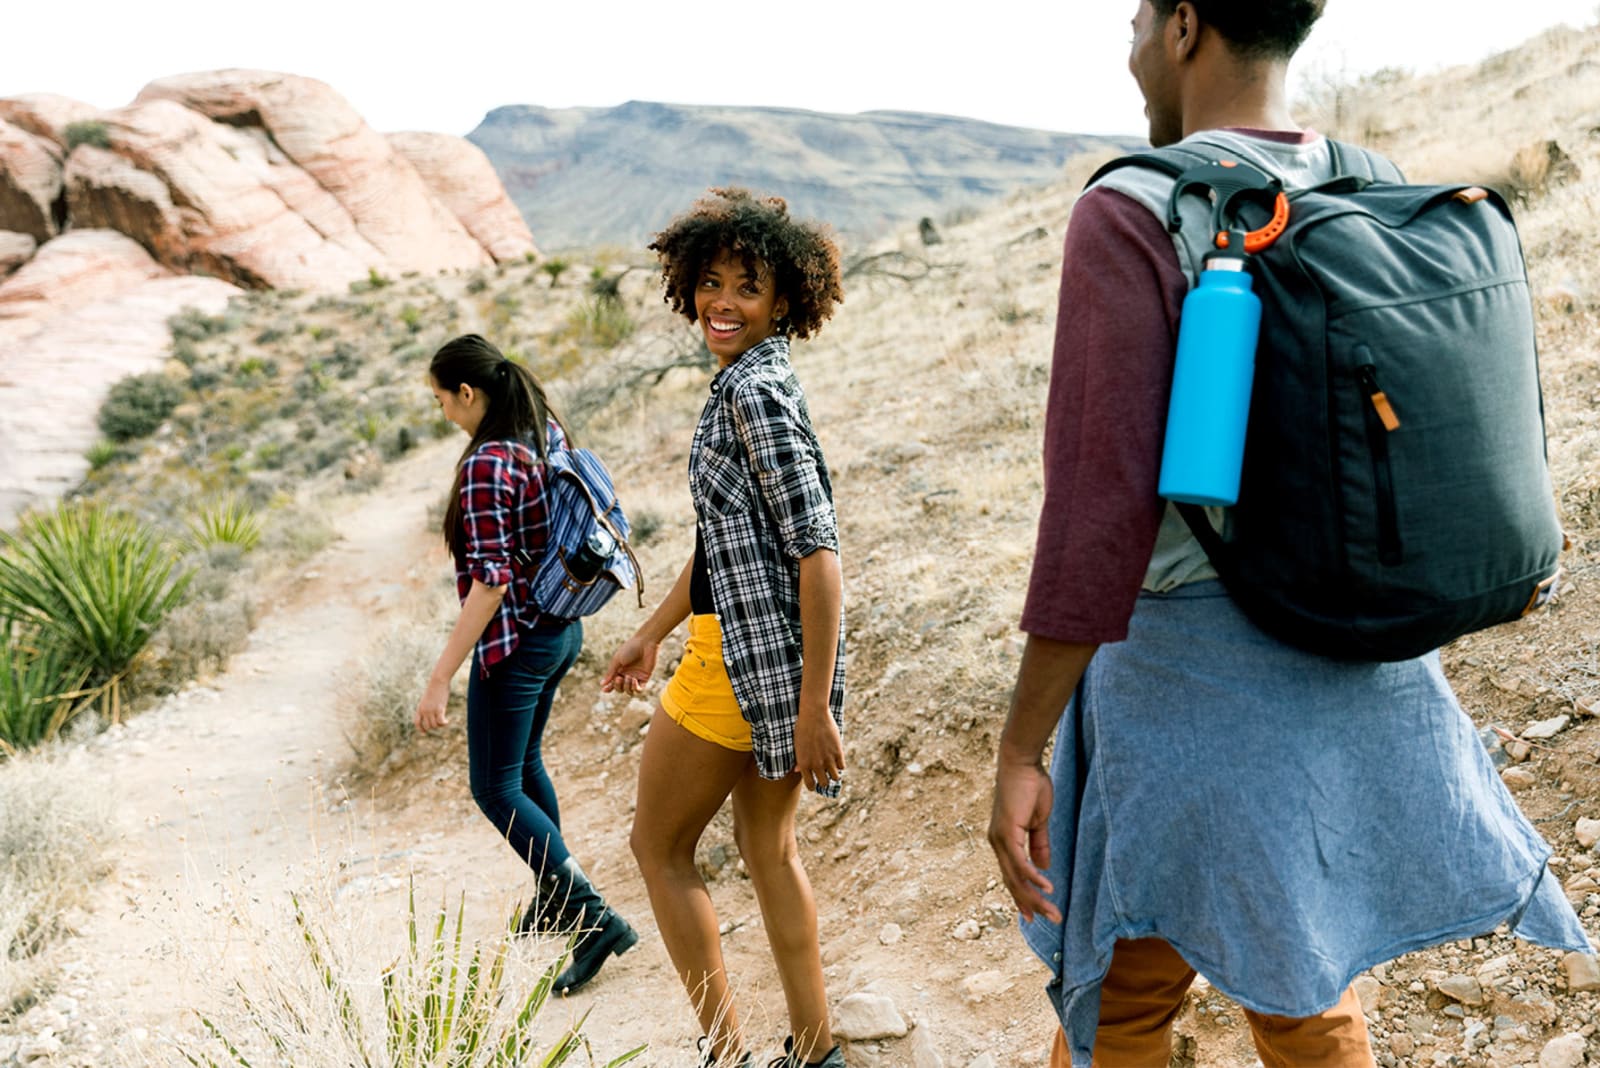 Group of three people hiking in a desert landscape